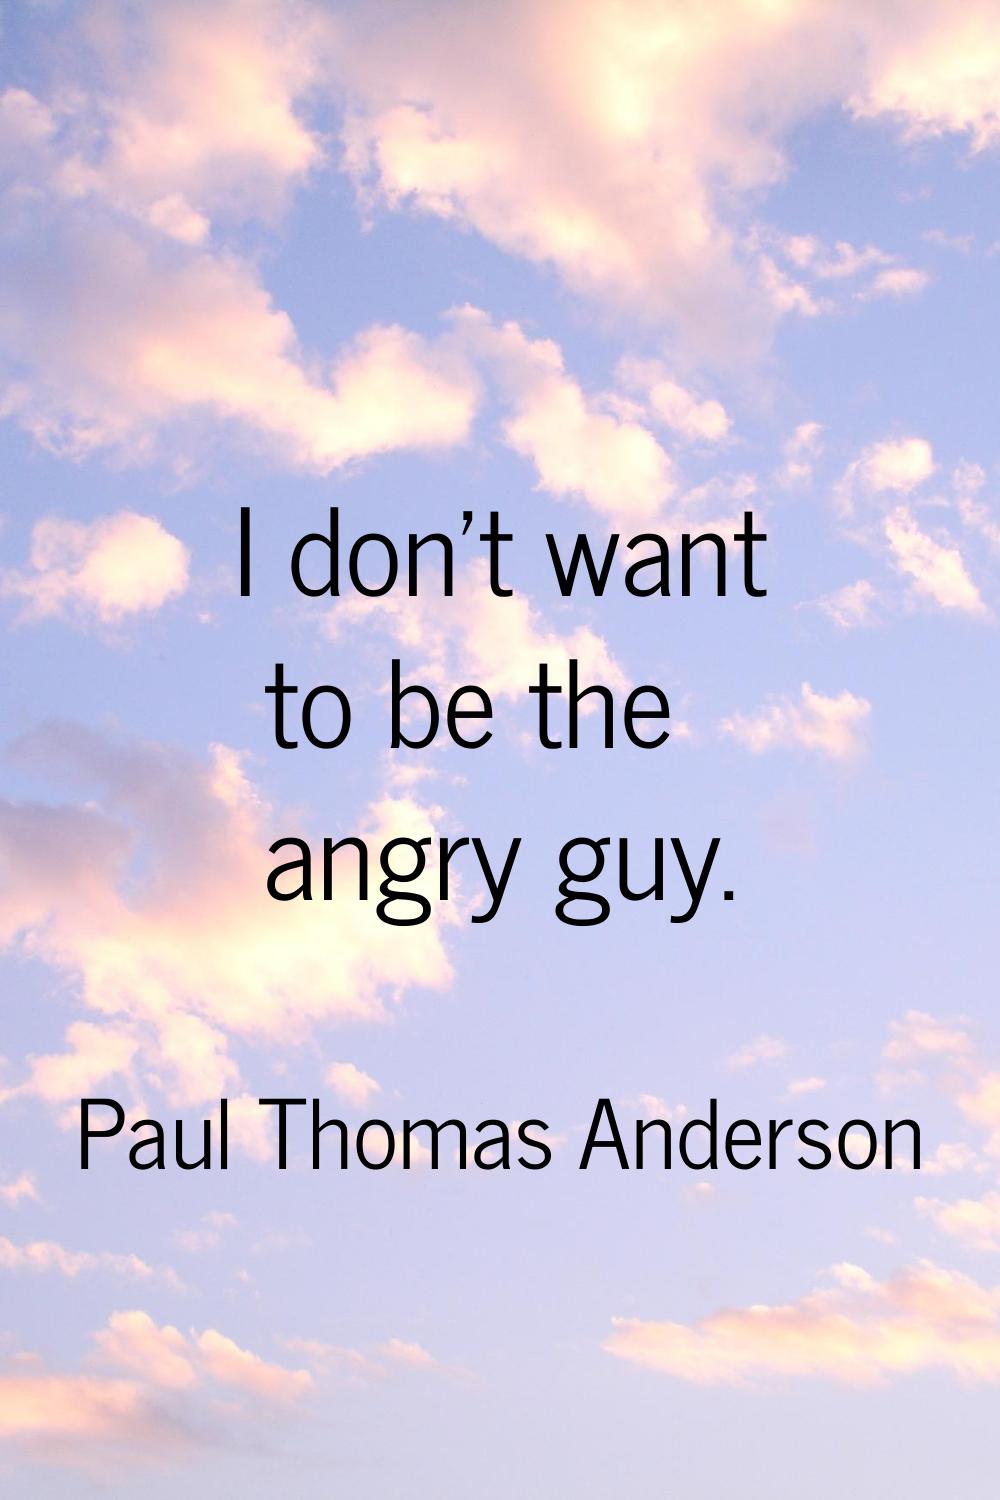 I don't want to be the angry guy.